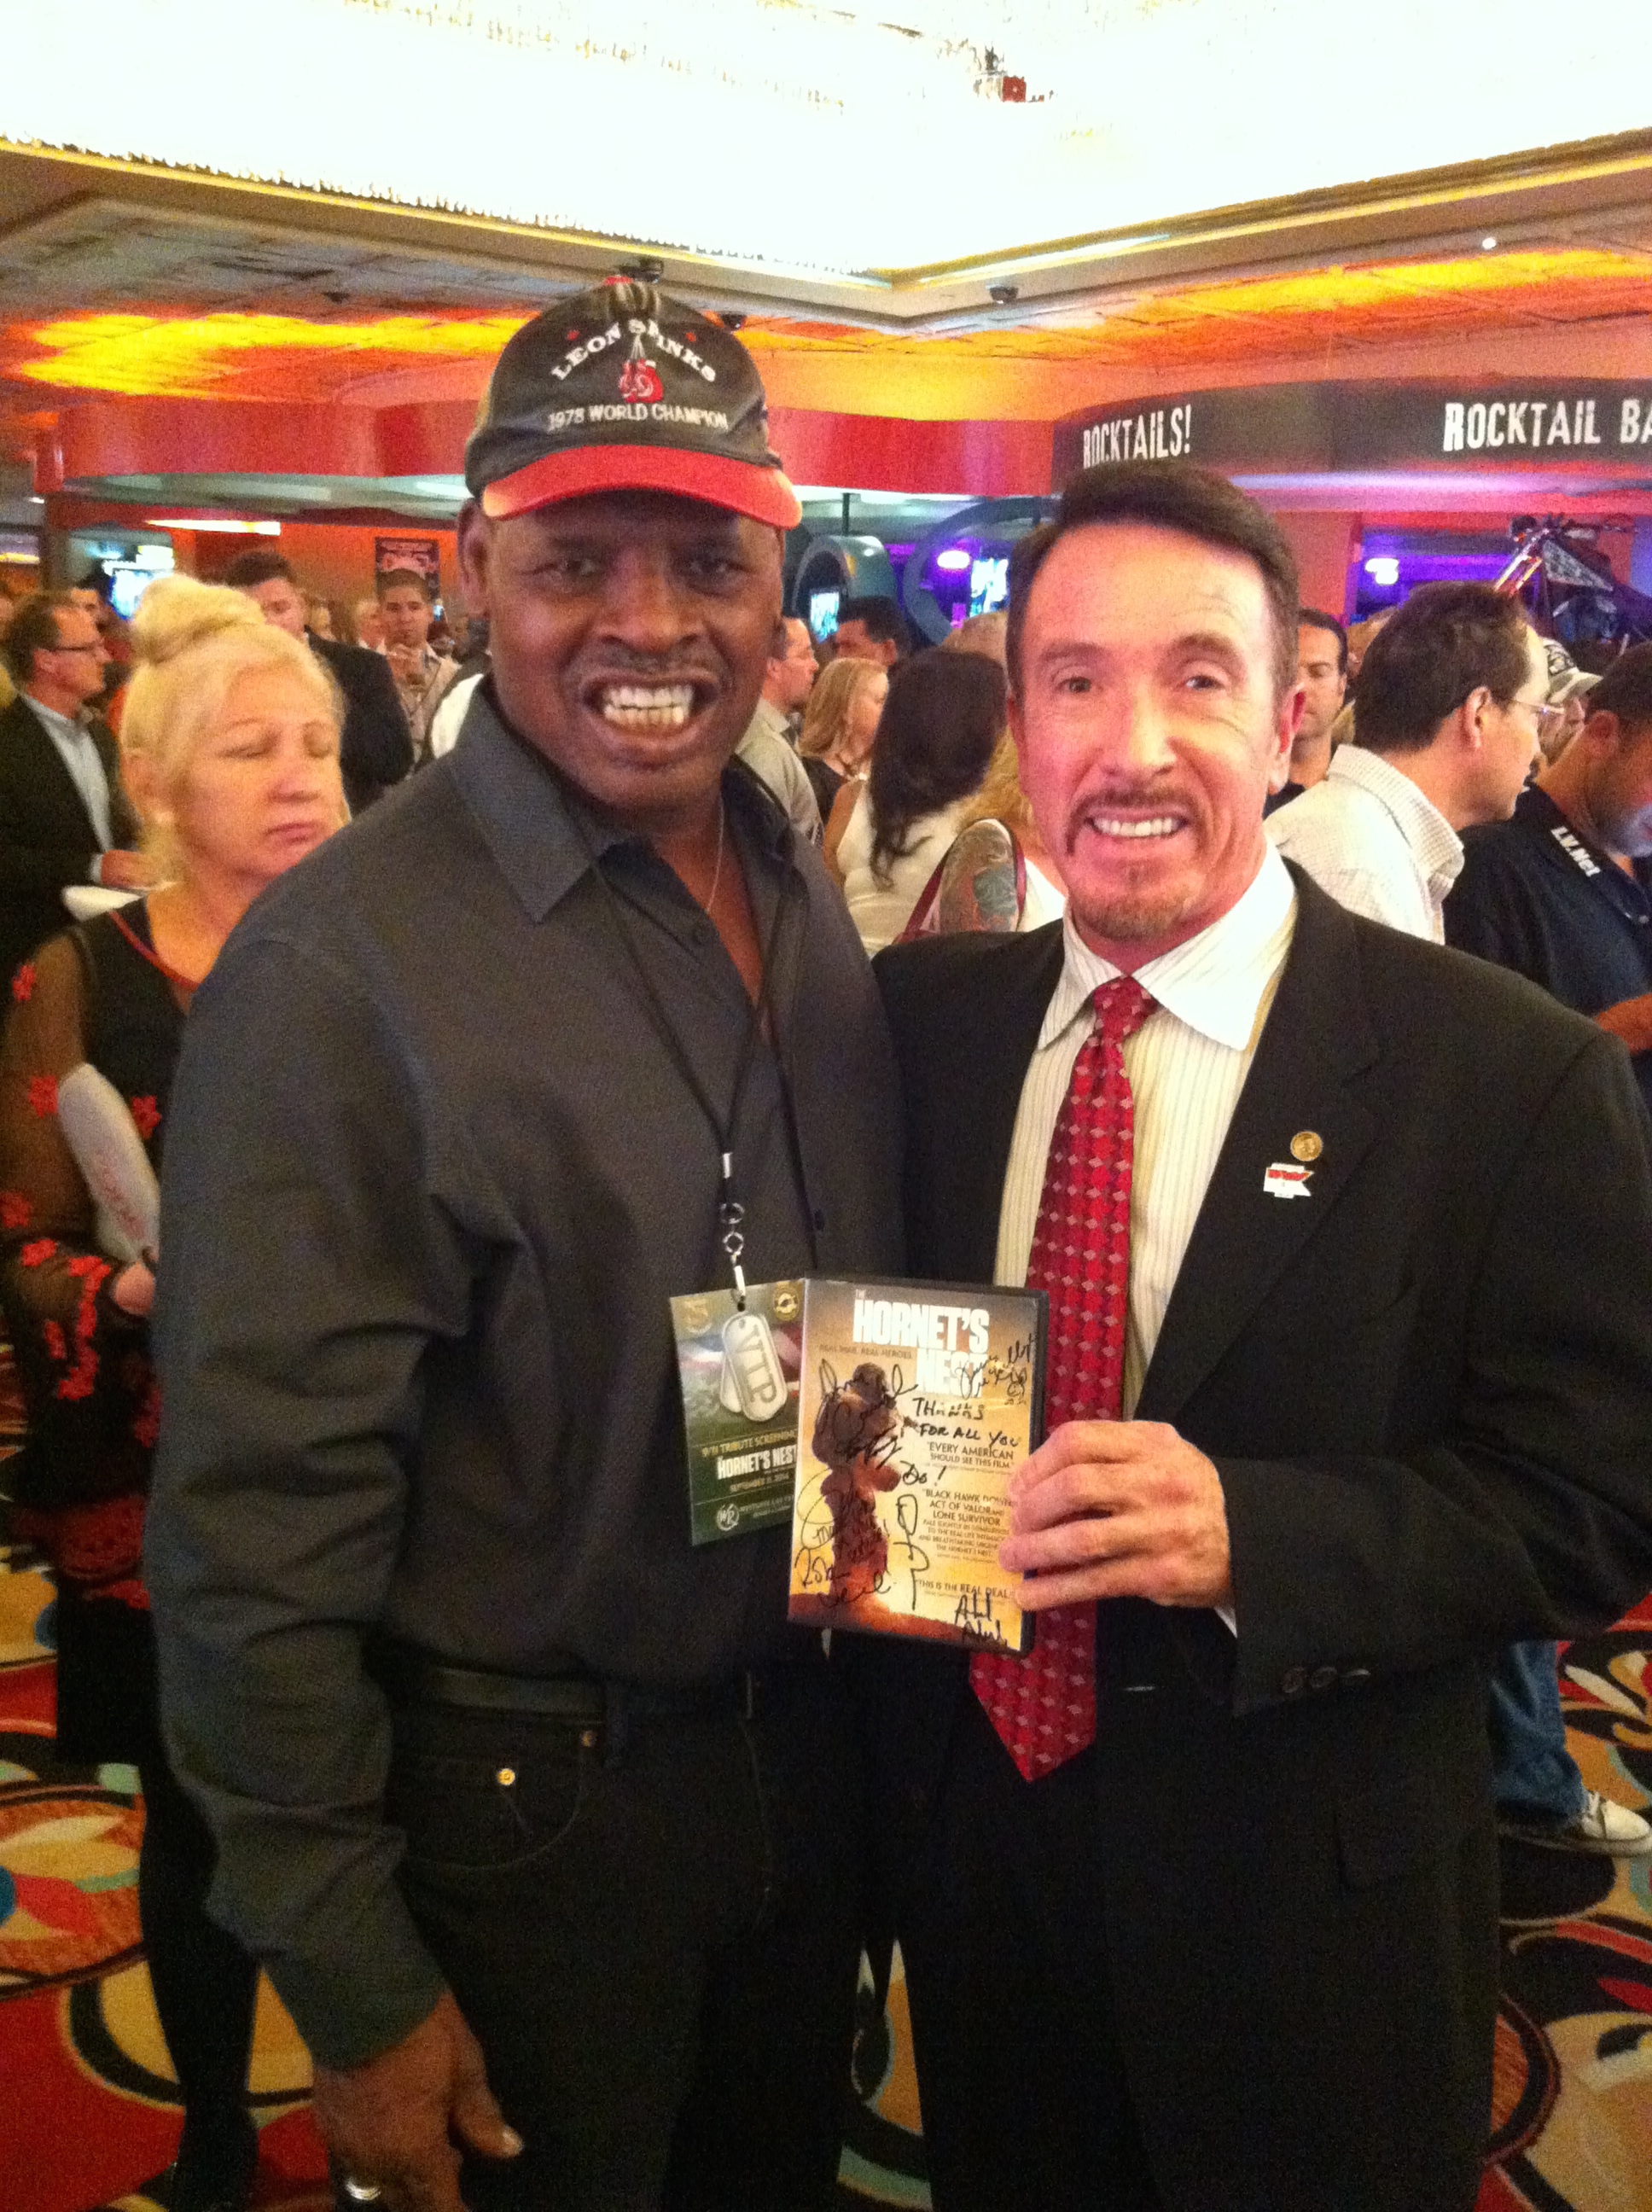 Leon Spinks and David. Green Beret Foundation Charity Screening of The Hornet's Nest on 9/11 @ Westgate Las Vegas.